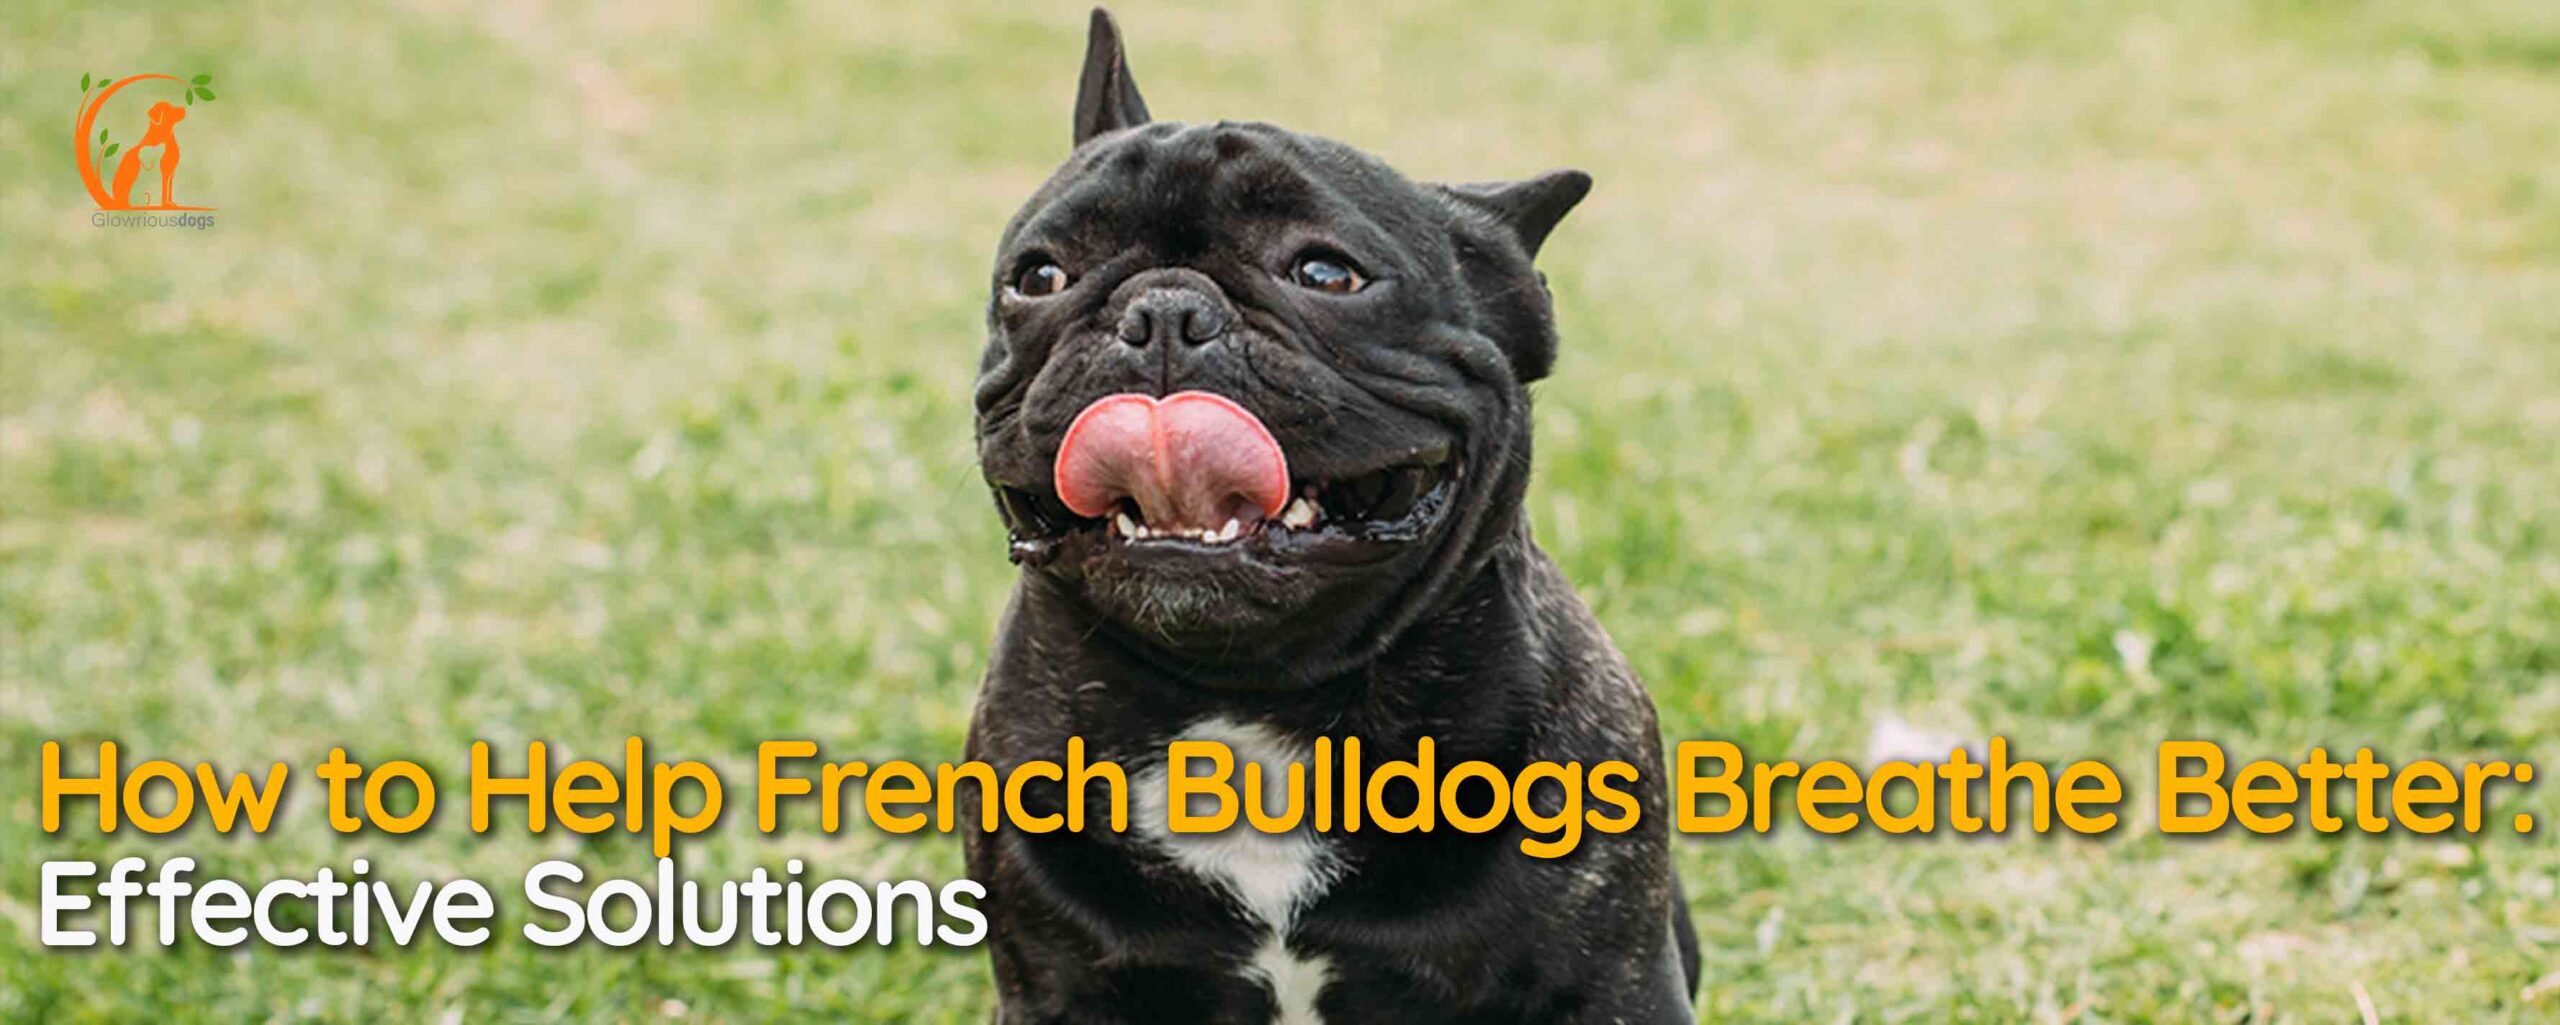 How to Help French Bulldogs Breathe Better: Effective Solutions